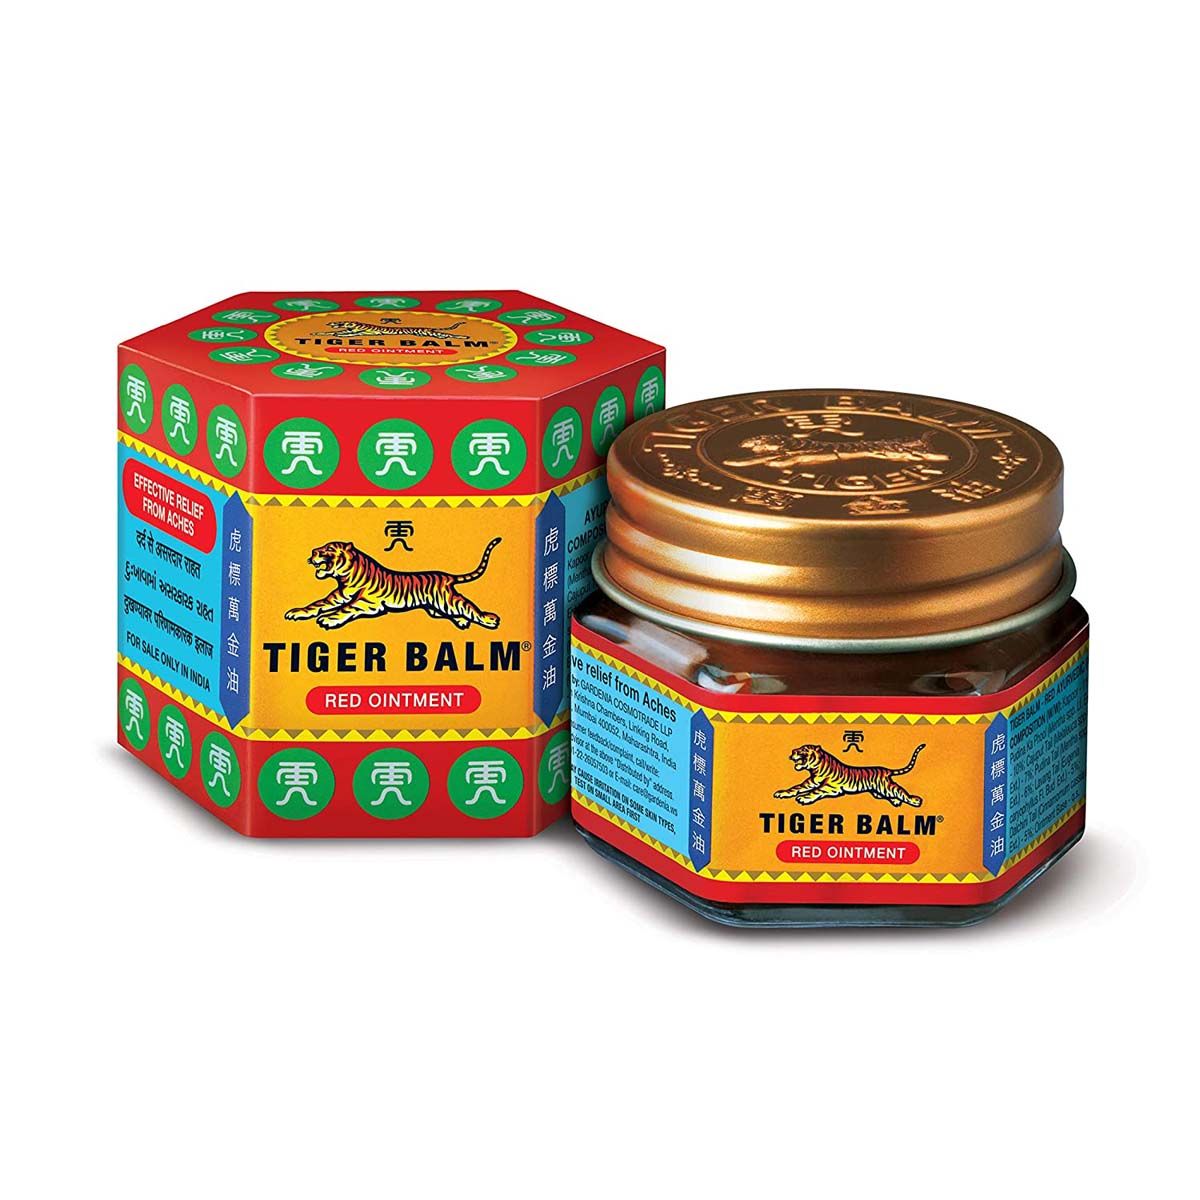 Tiger Balm Red Ointement, 21 ml, Pack of 1 